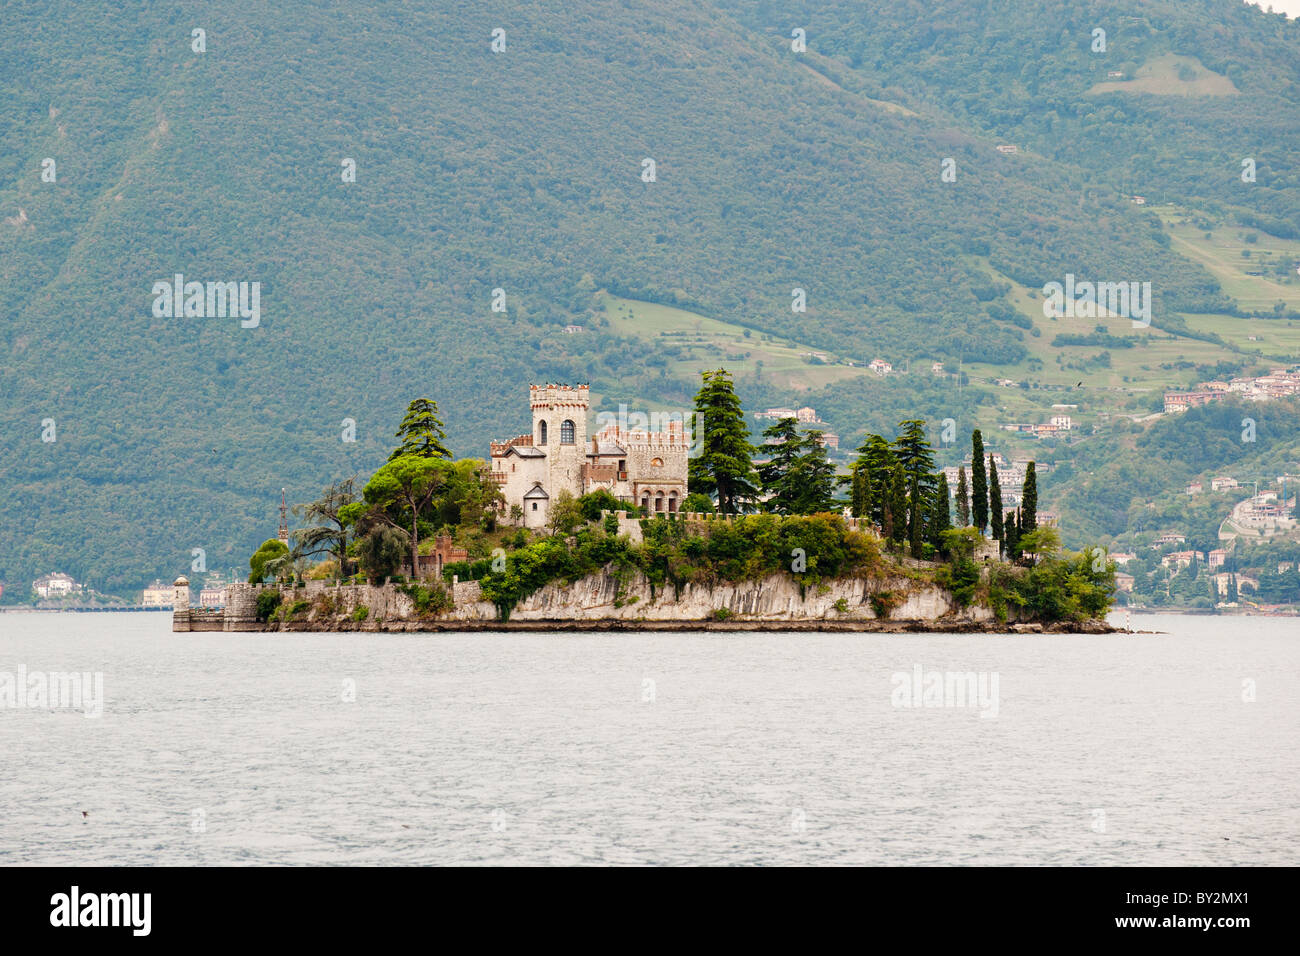 island with castle in the Italian lago d'iseo Stock Photo